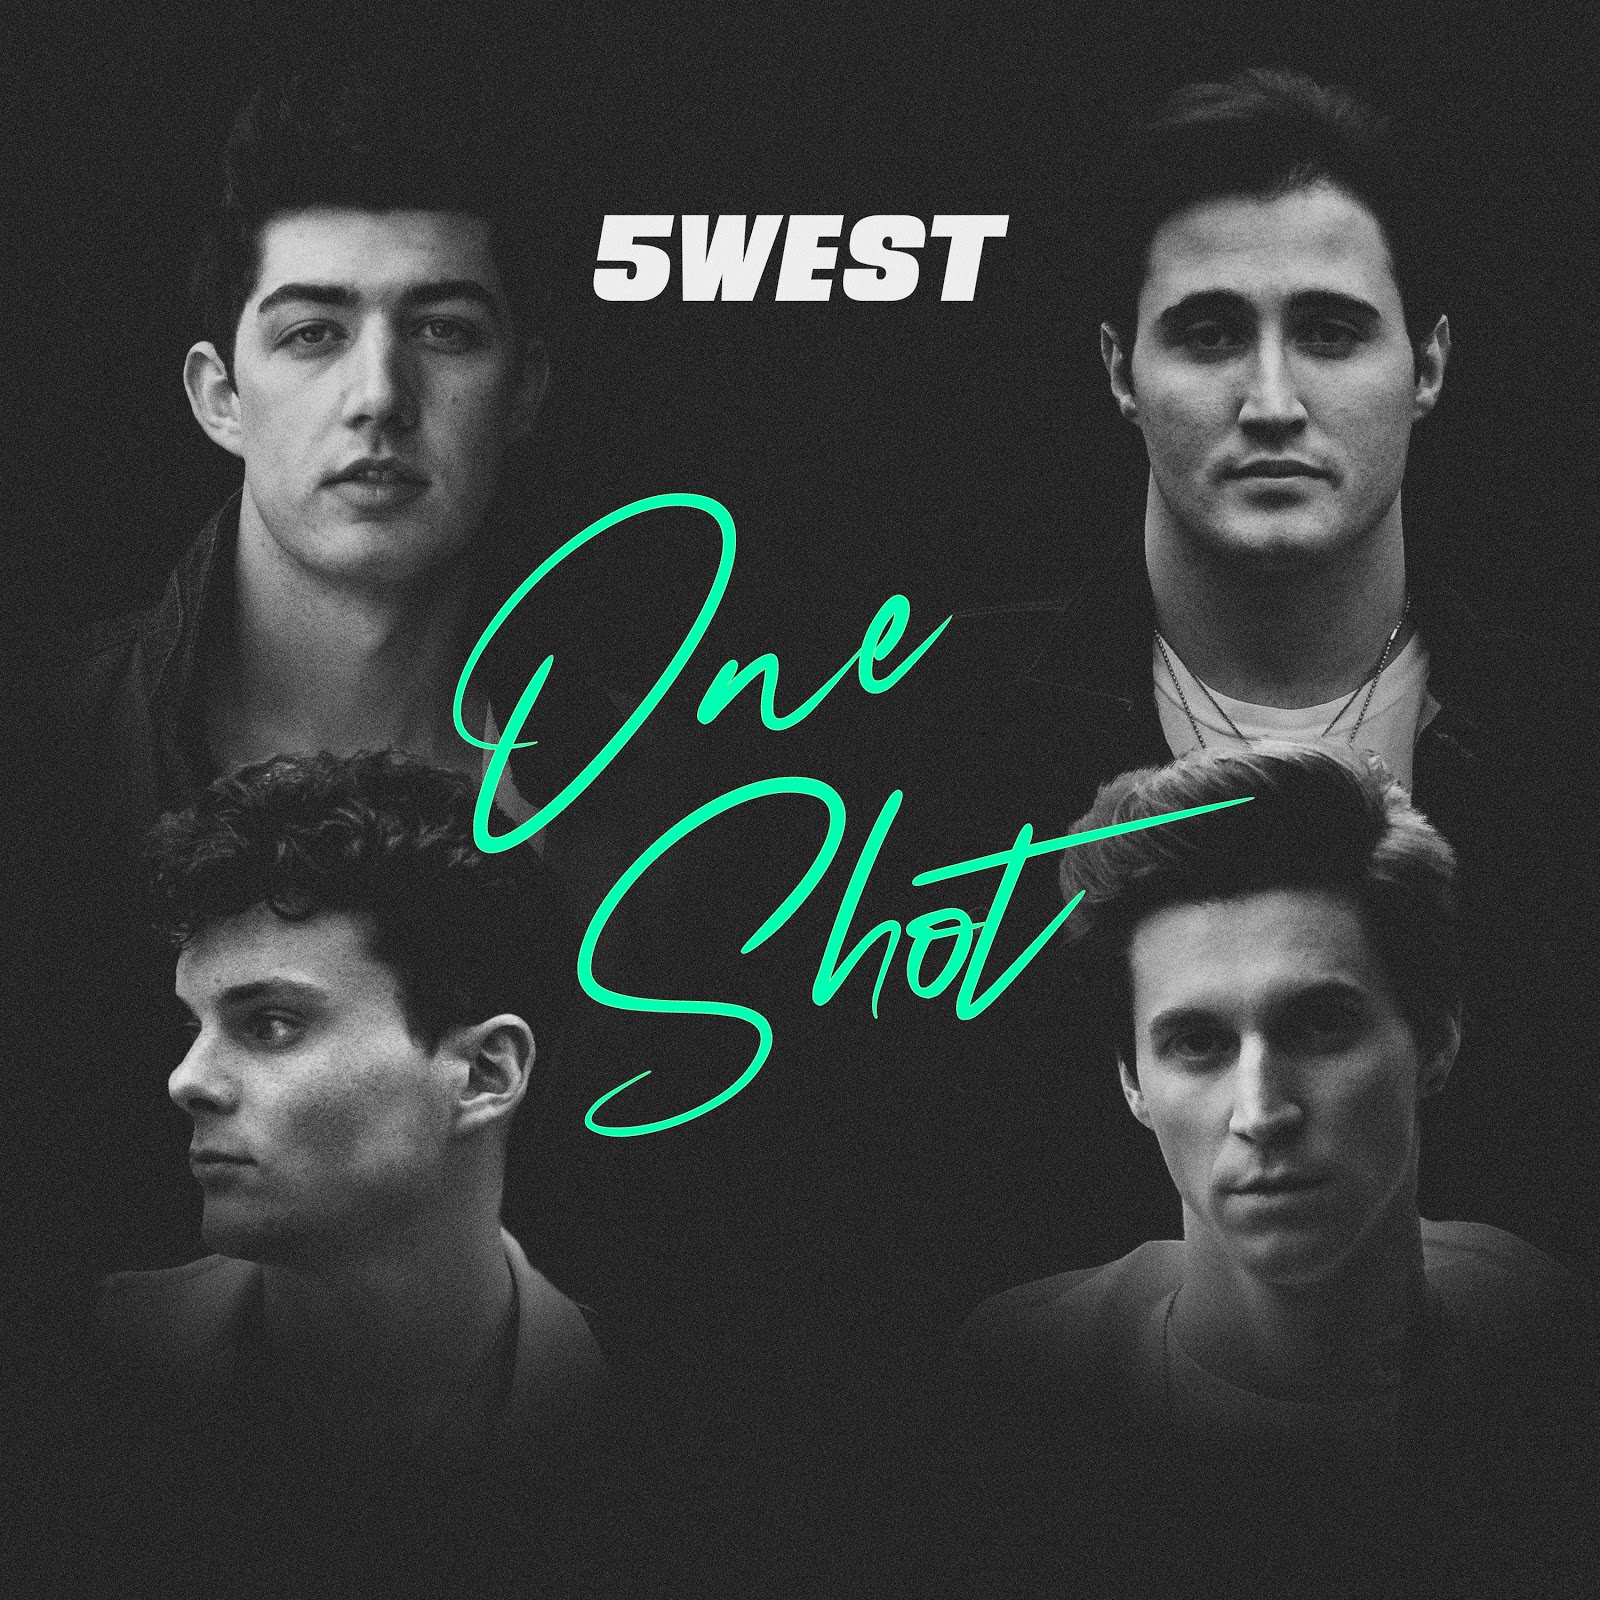 5weet one shot single cover